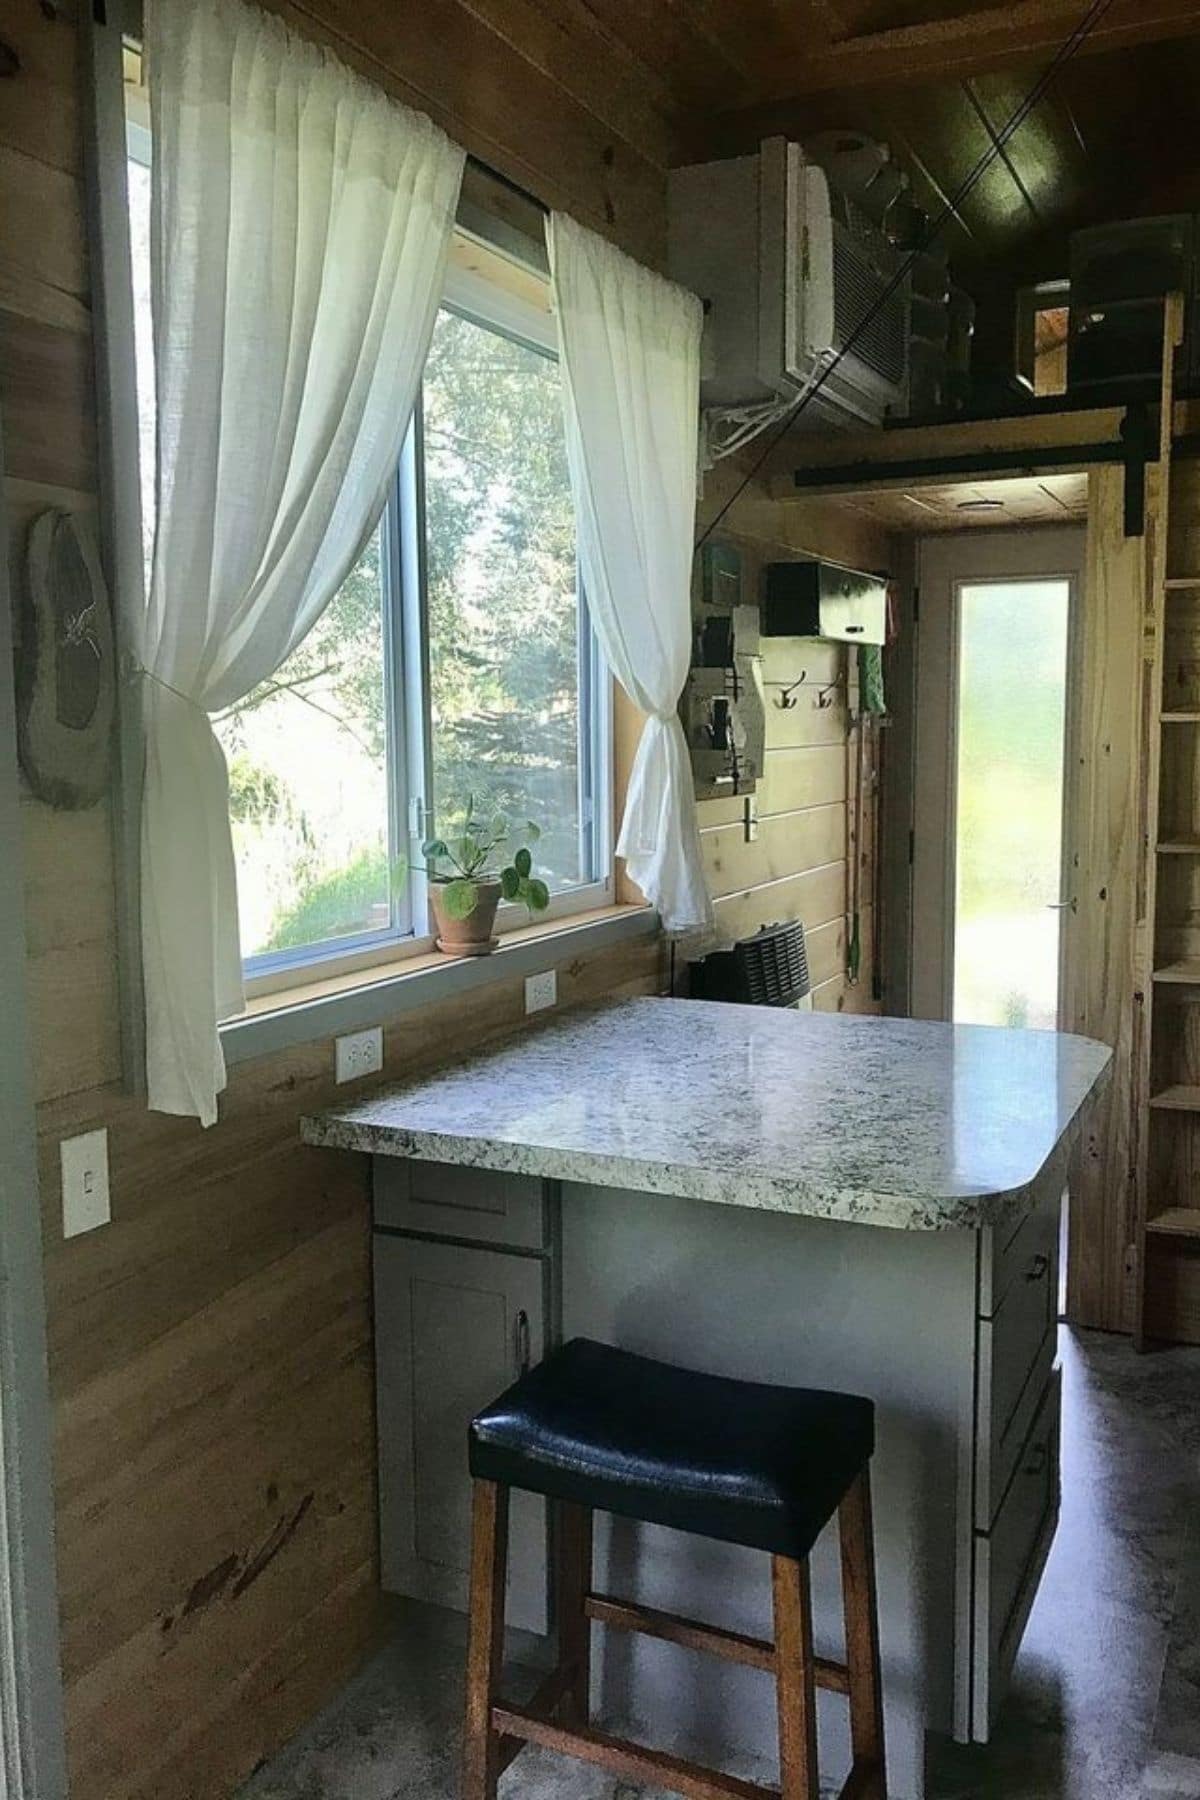 Table under window with bar stool